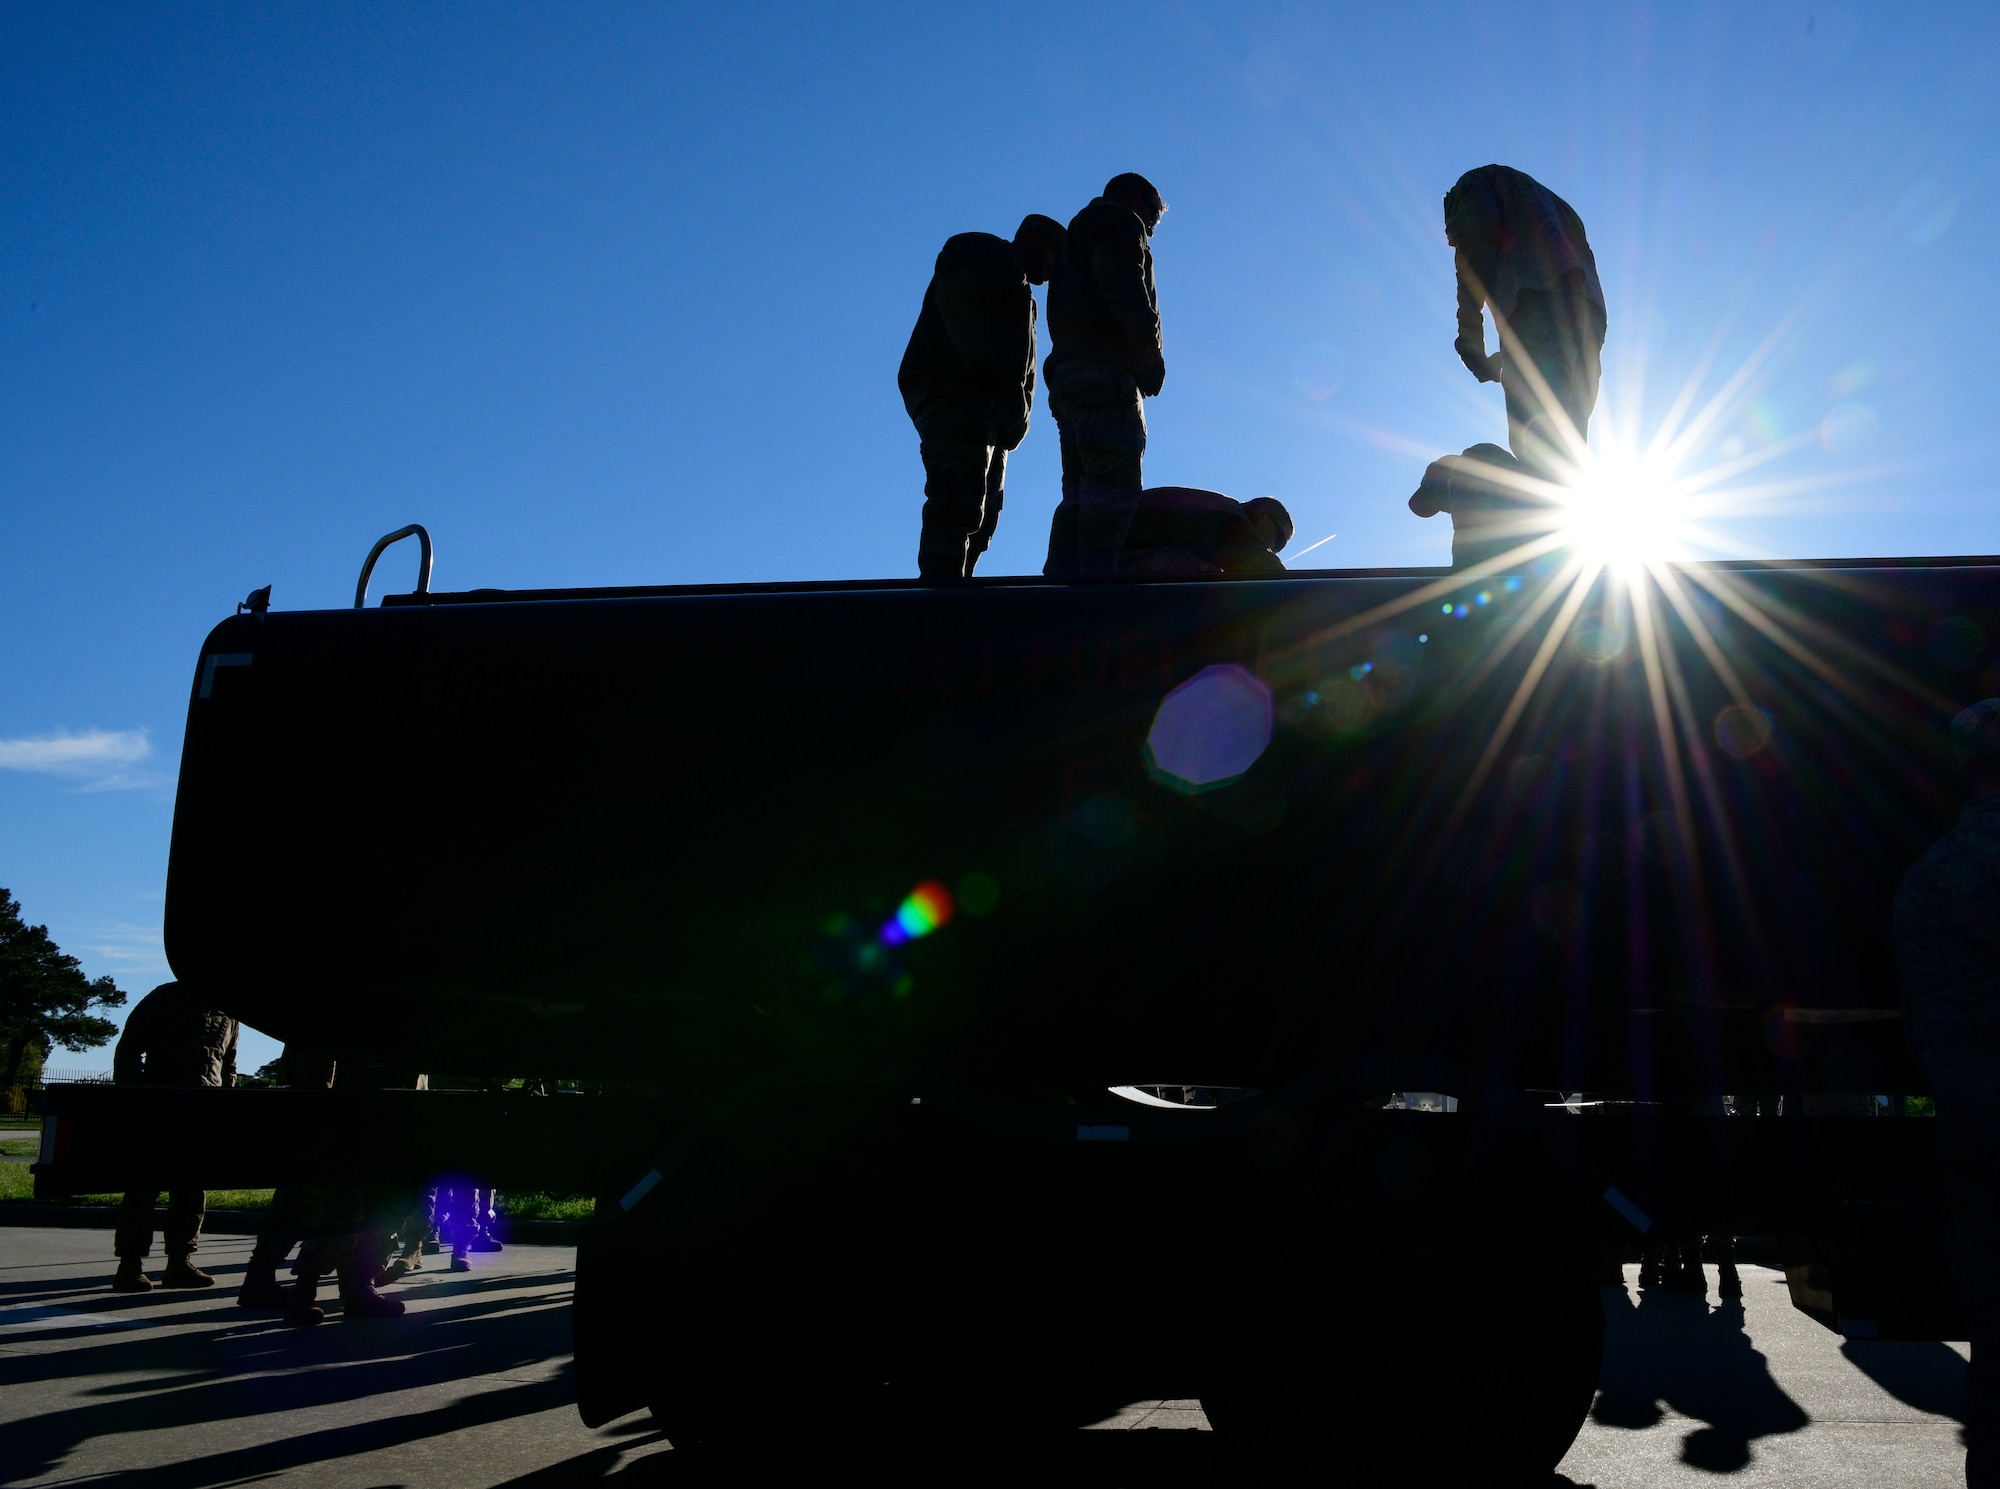 Airmen learn the components of an R-11 refueling truck during Combat Support Wing training April 16, 2019, at Seymour Johnson Air Force Base, North Carolina.